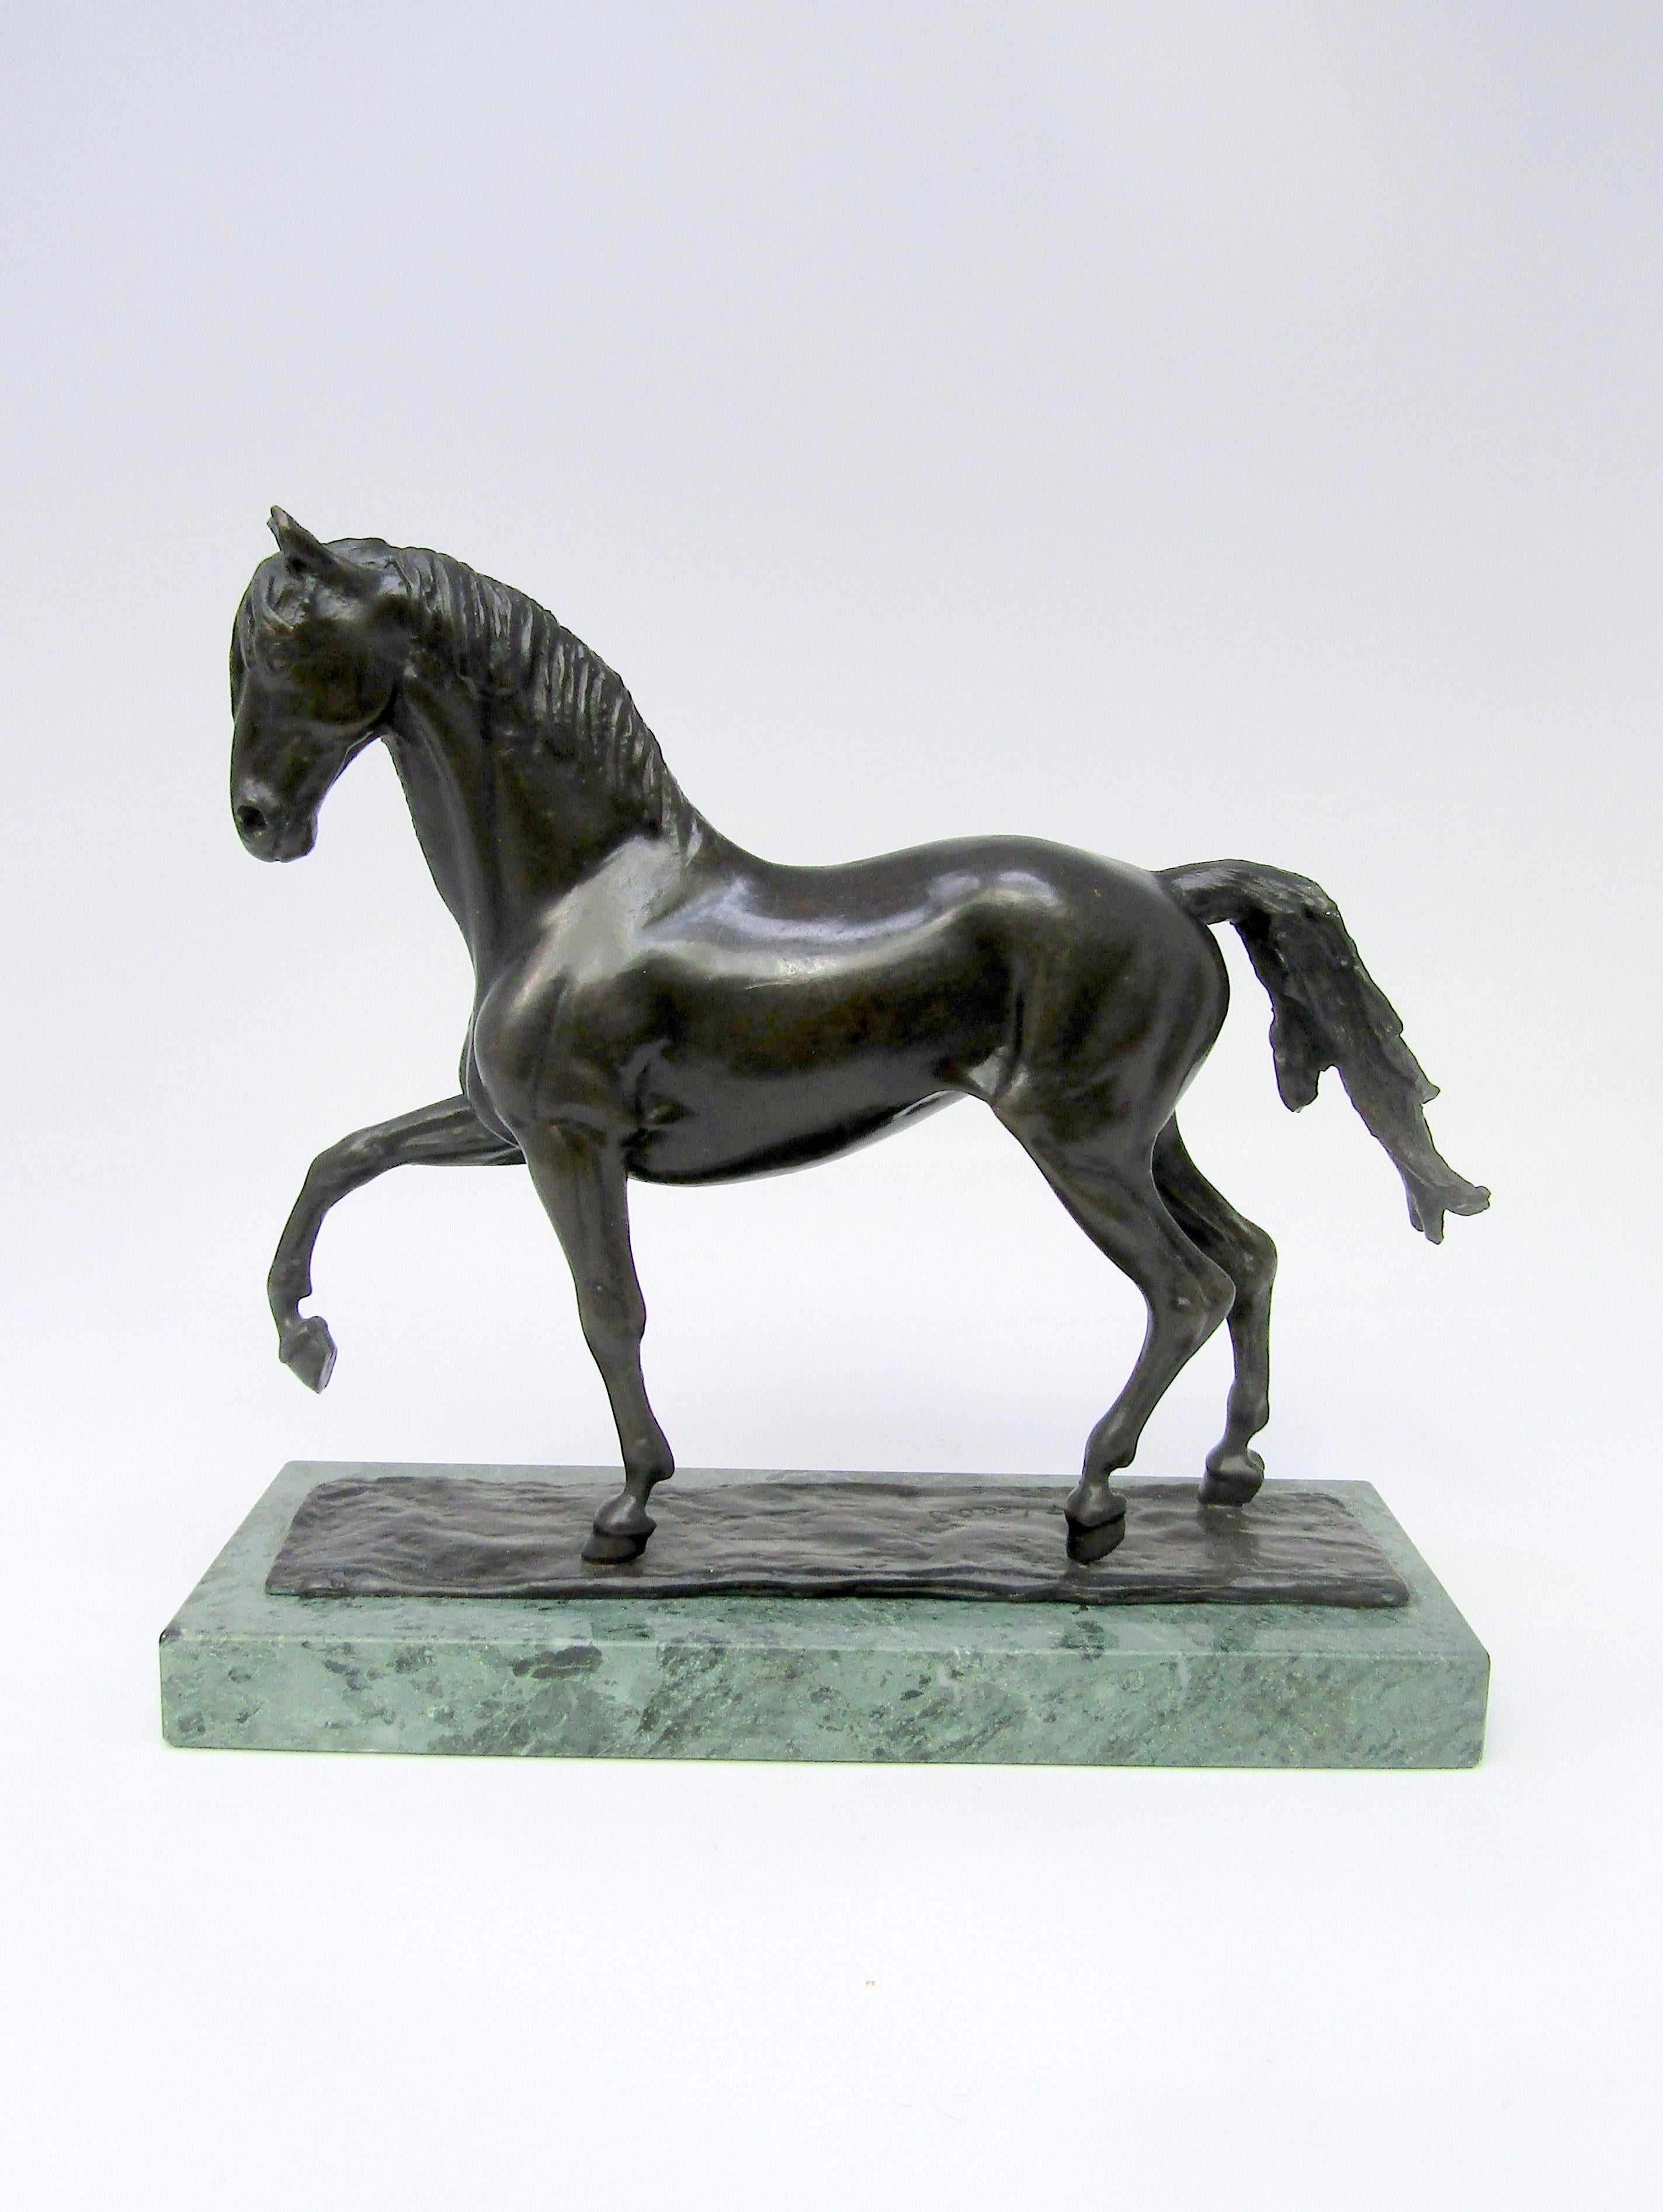 A dark patinated bronze sculpture of 'Bucephalus' on a
green marble base by James Osborne (1940-1992)
Signed and numbered 277/2000
British, circa 1985

Measures: Height 7 ¾ in / 18.5 cm
Width 8 ½ in / 21 cm.

The famous black stallion